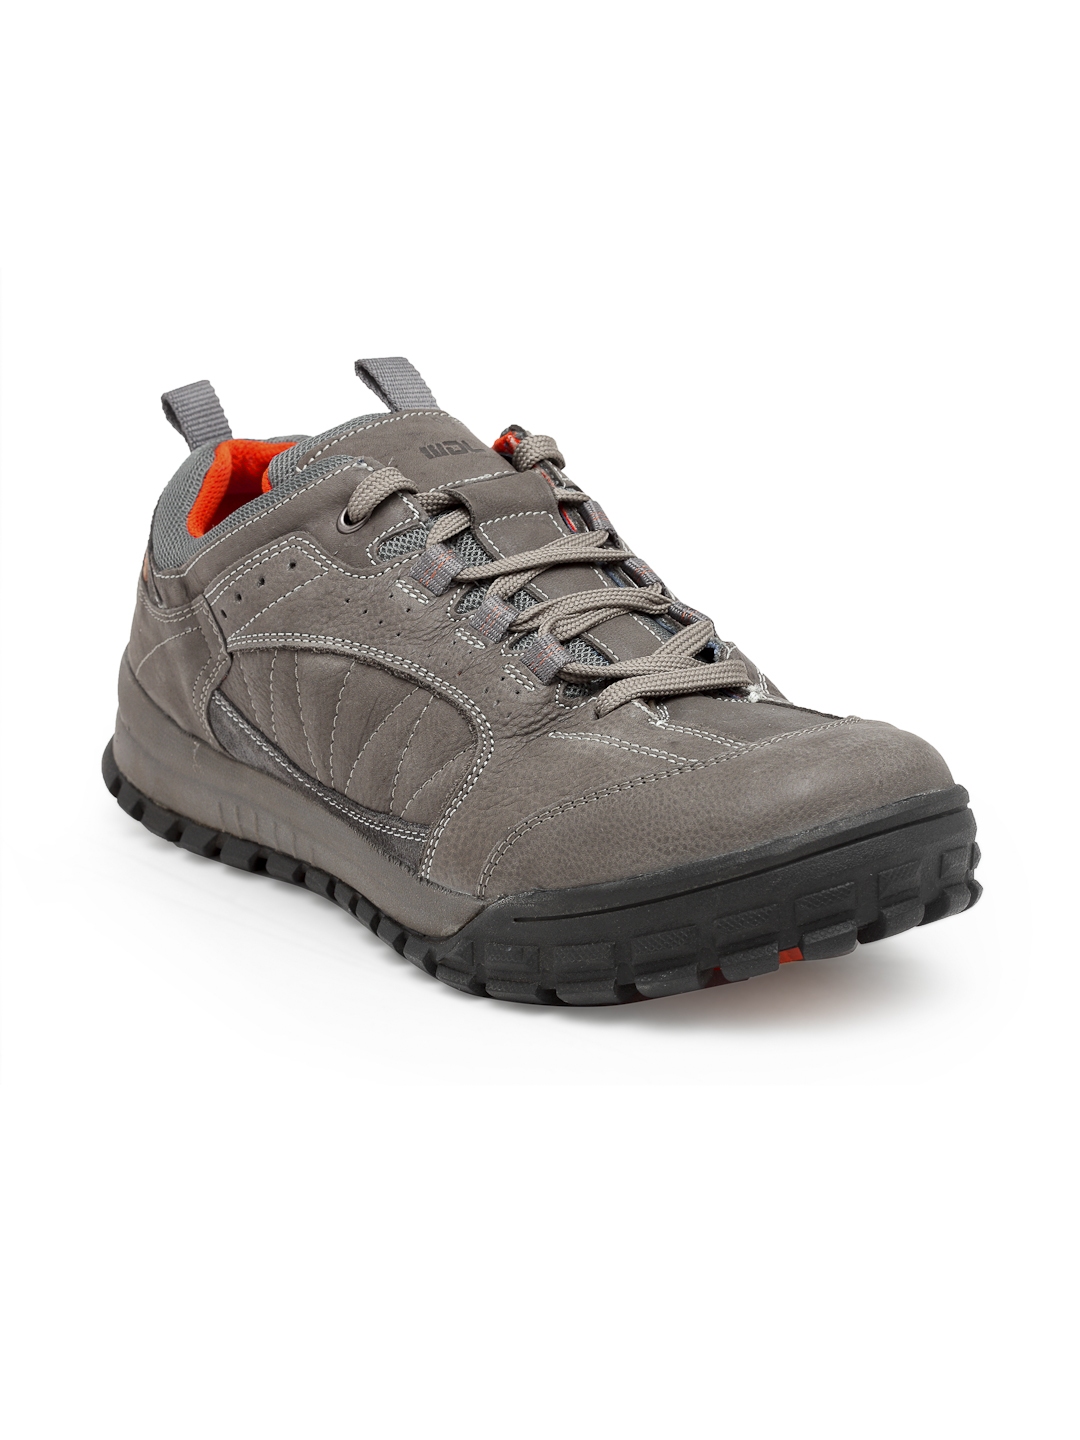 woodland proplanet shoes price